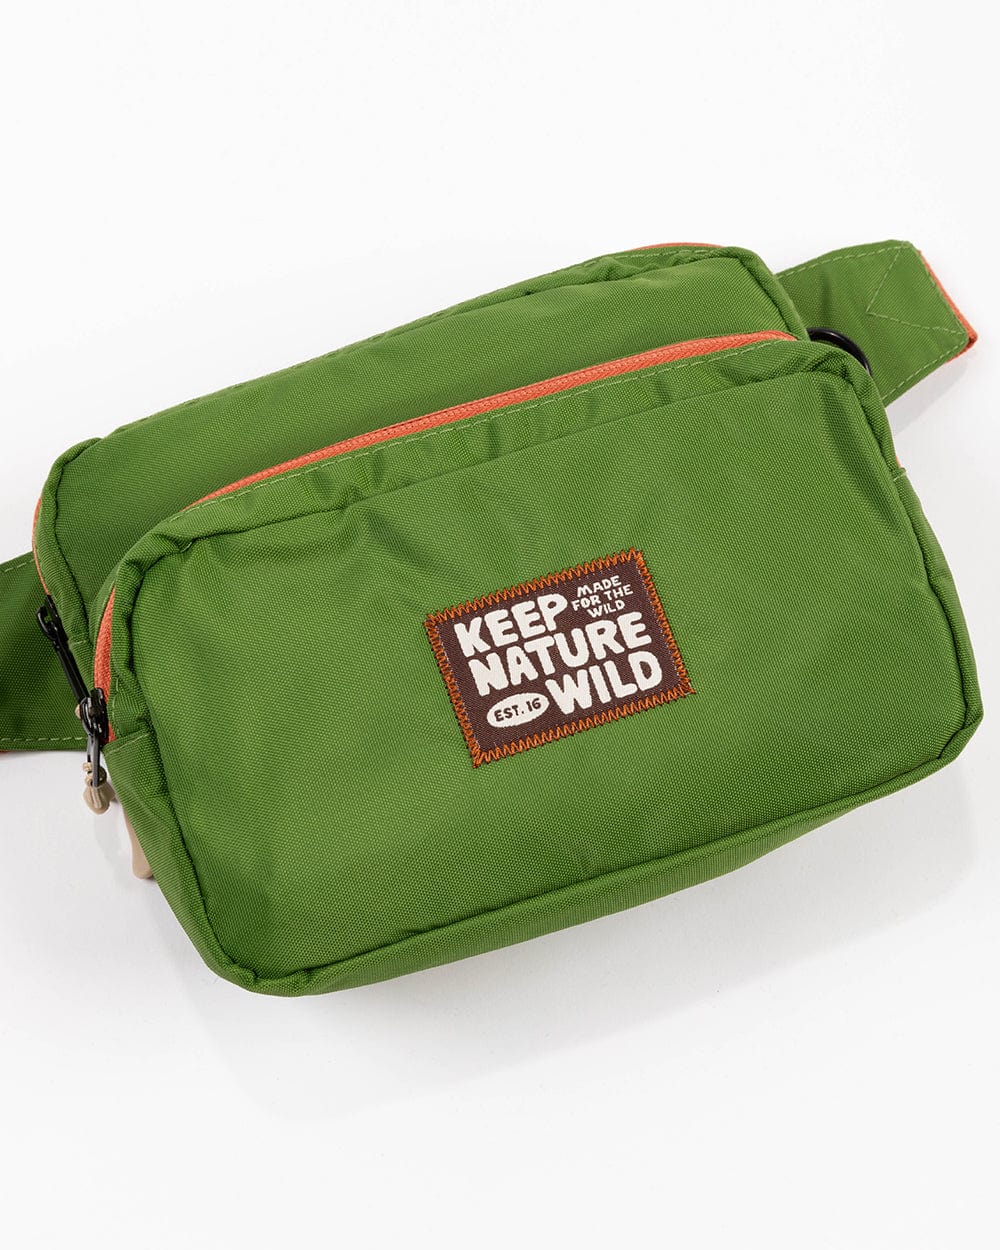 Keep Nature Wild KNW Fanny Pack | Moss/Clay